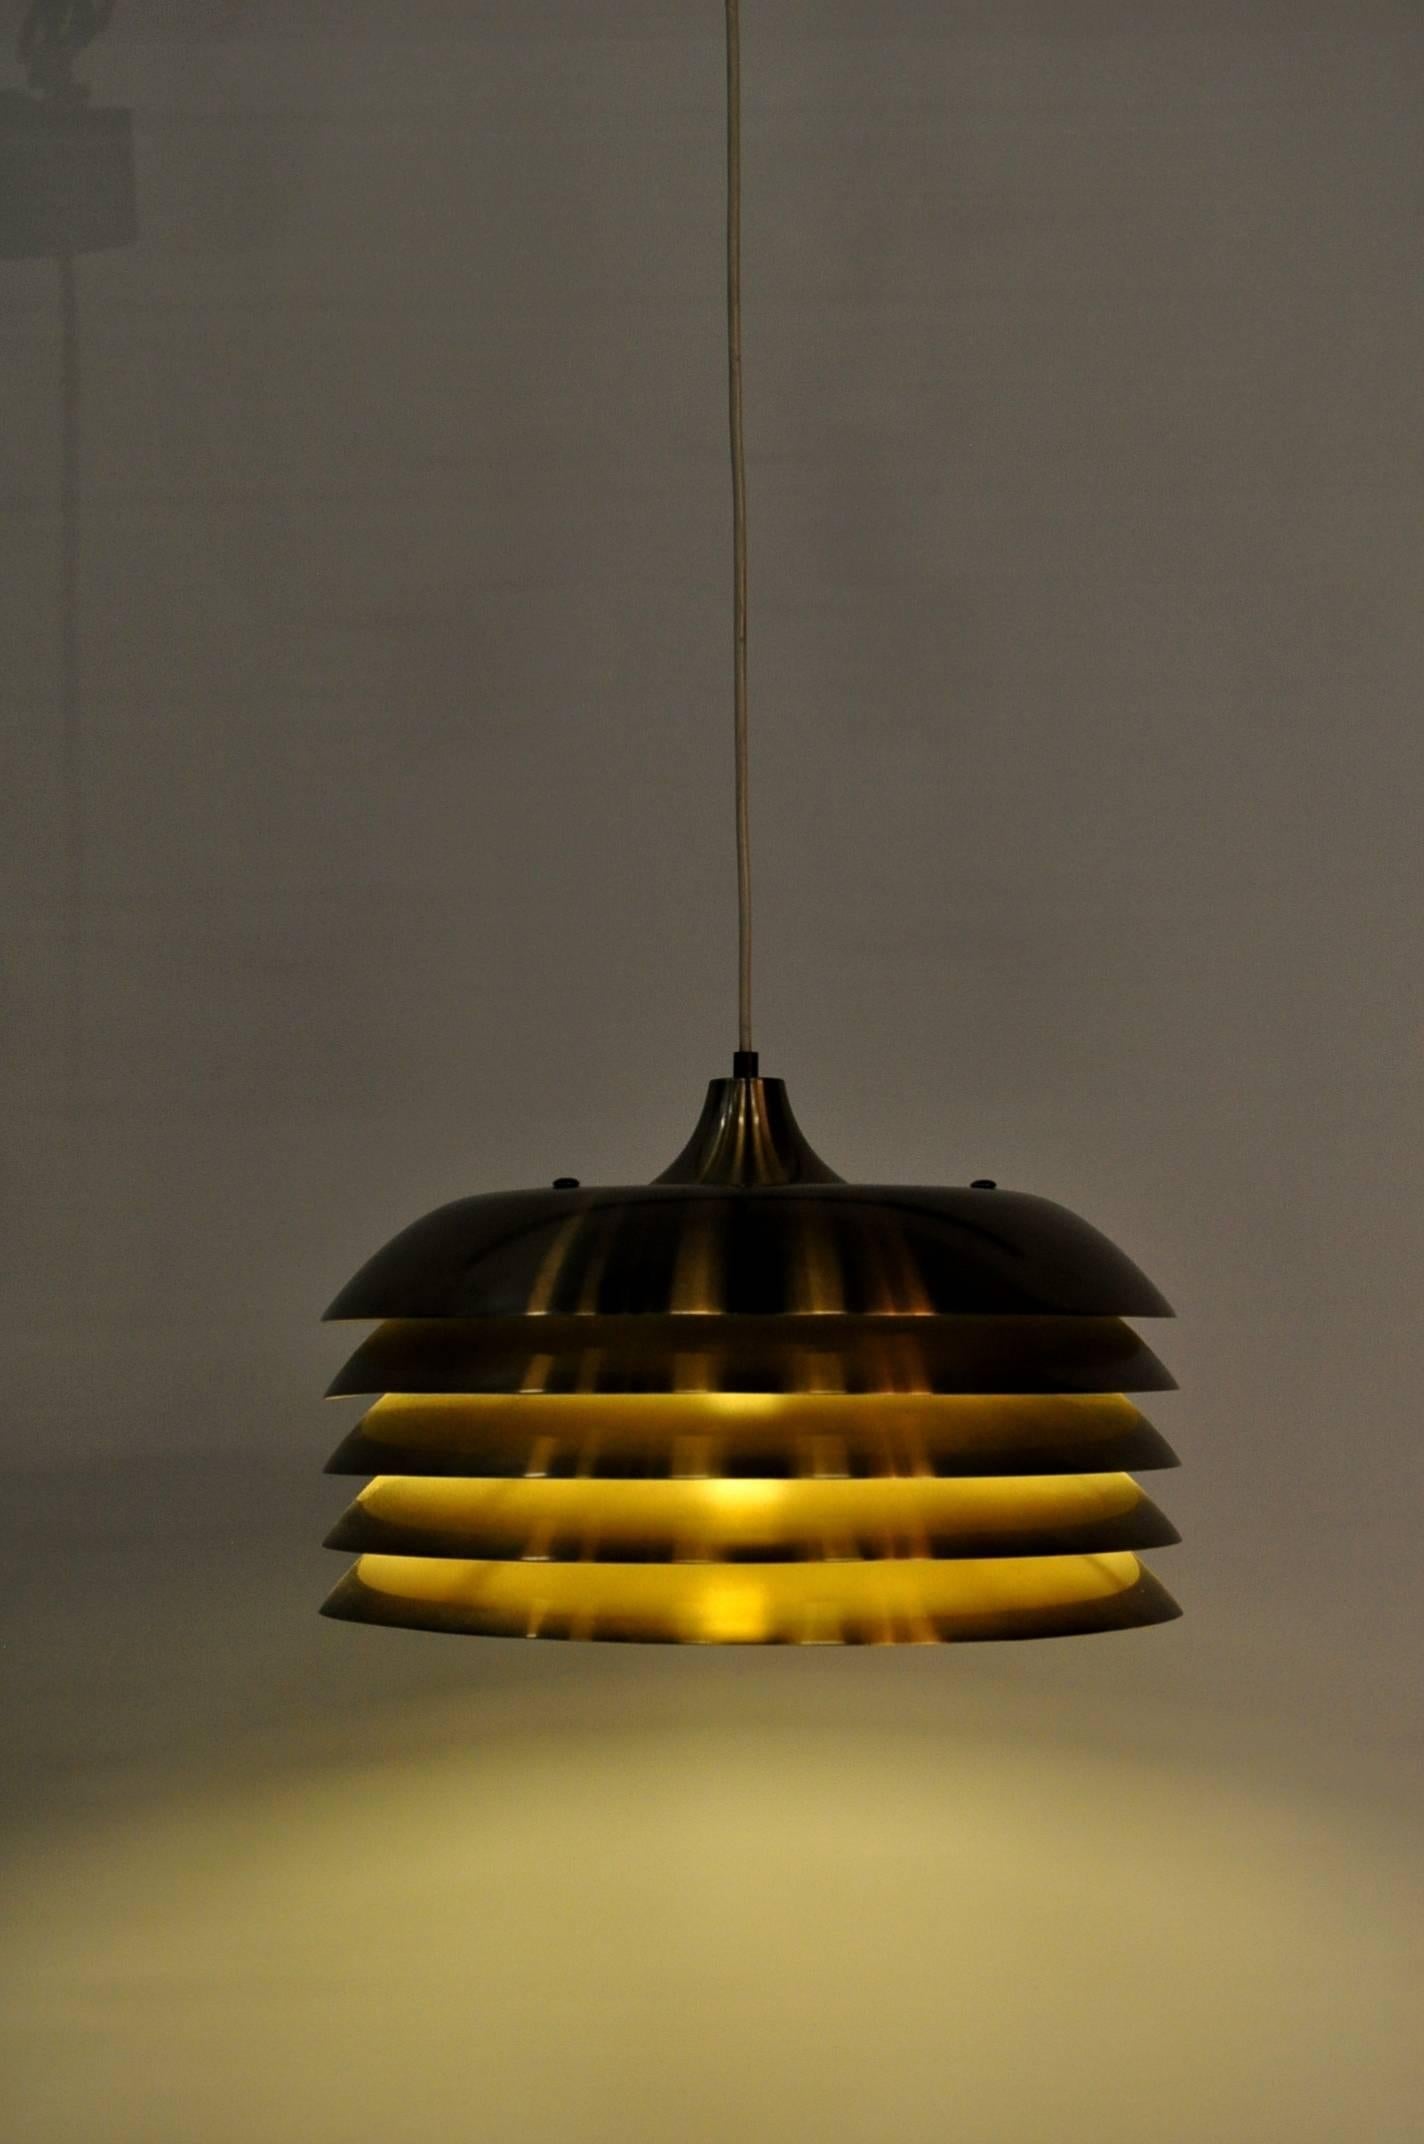 Mid-20th Century Hanging Lamp by Hans-Agne Jakobsson for AB Markaryd, Sweden, circa 1960